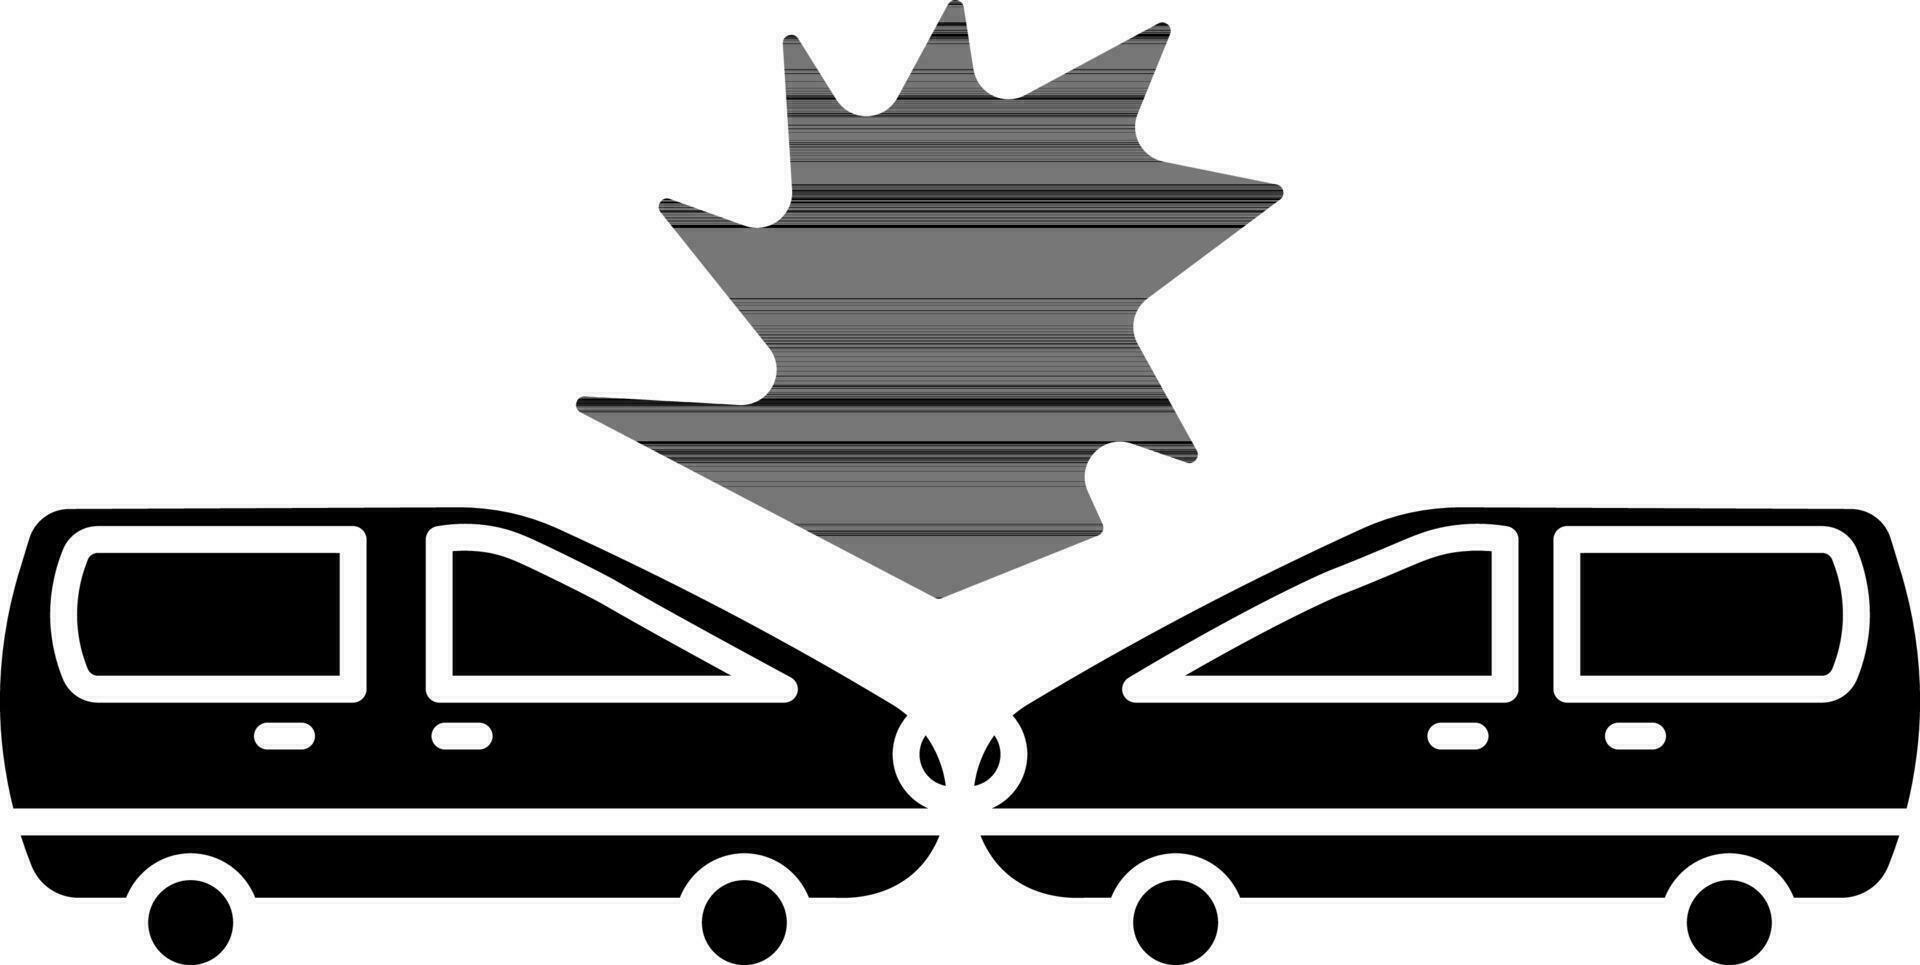 Car Accident Icon In black and white Color. vector